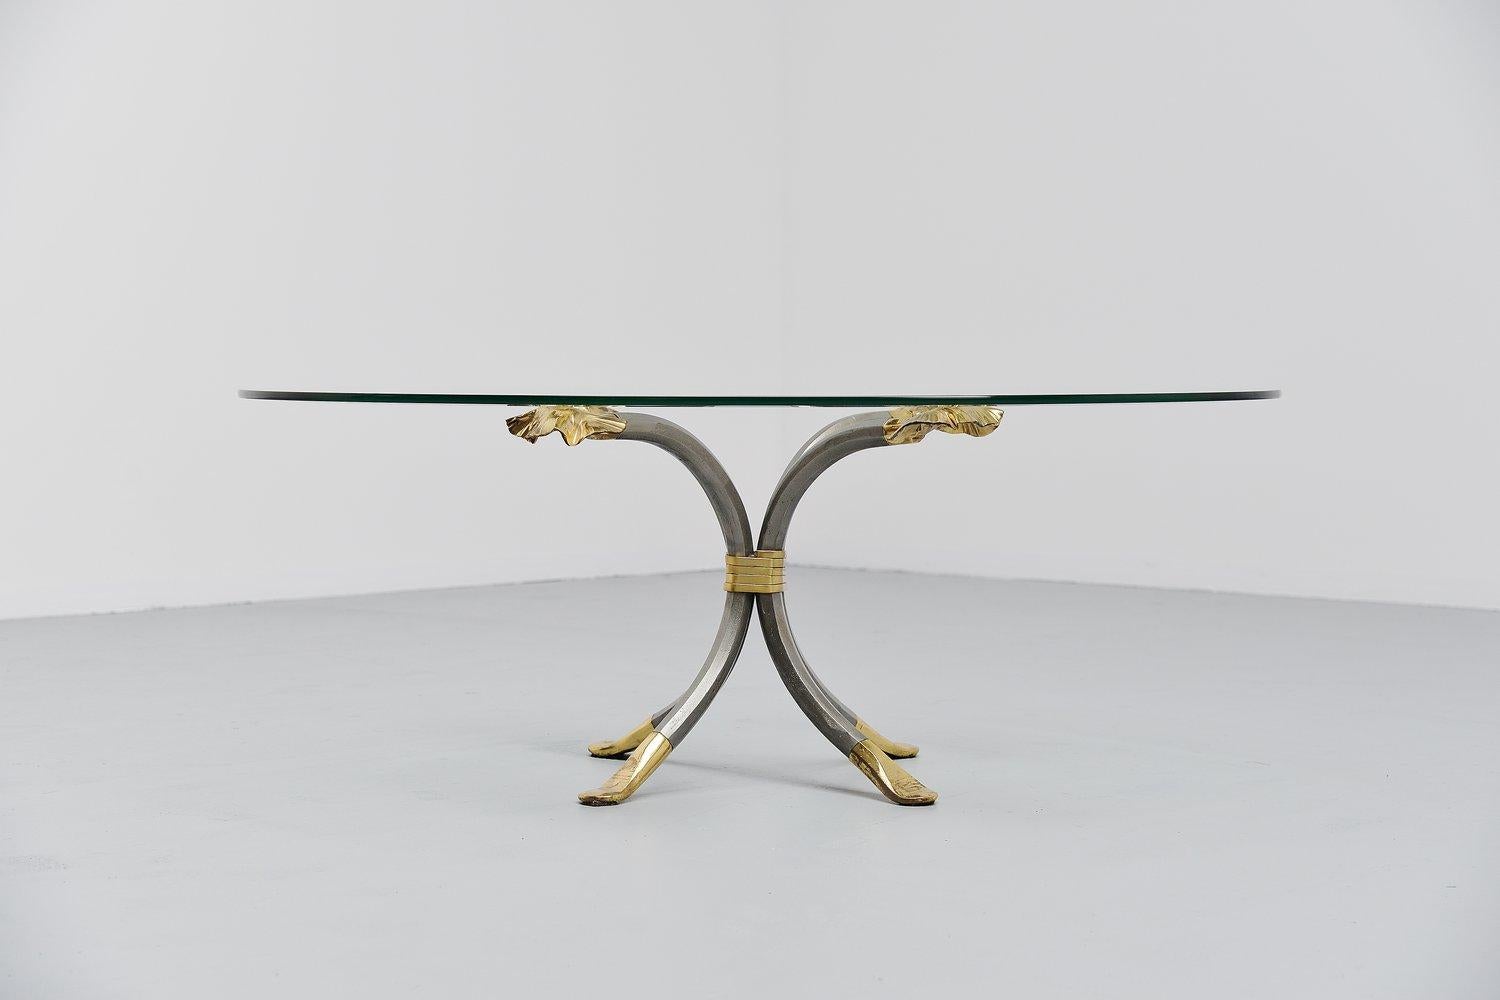 Very nice coffee table designed and made by the blacksmith Manfred Bredohl, Germany, 1970. This table has a lacquered iron base with brass details and an oval glass top. The table was stamped at one leg, Bredohl design. We have a pair of these